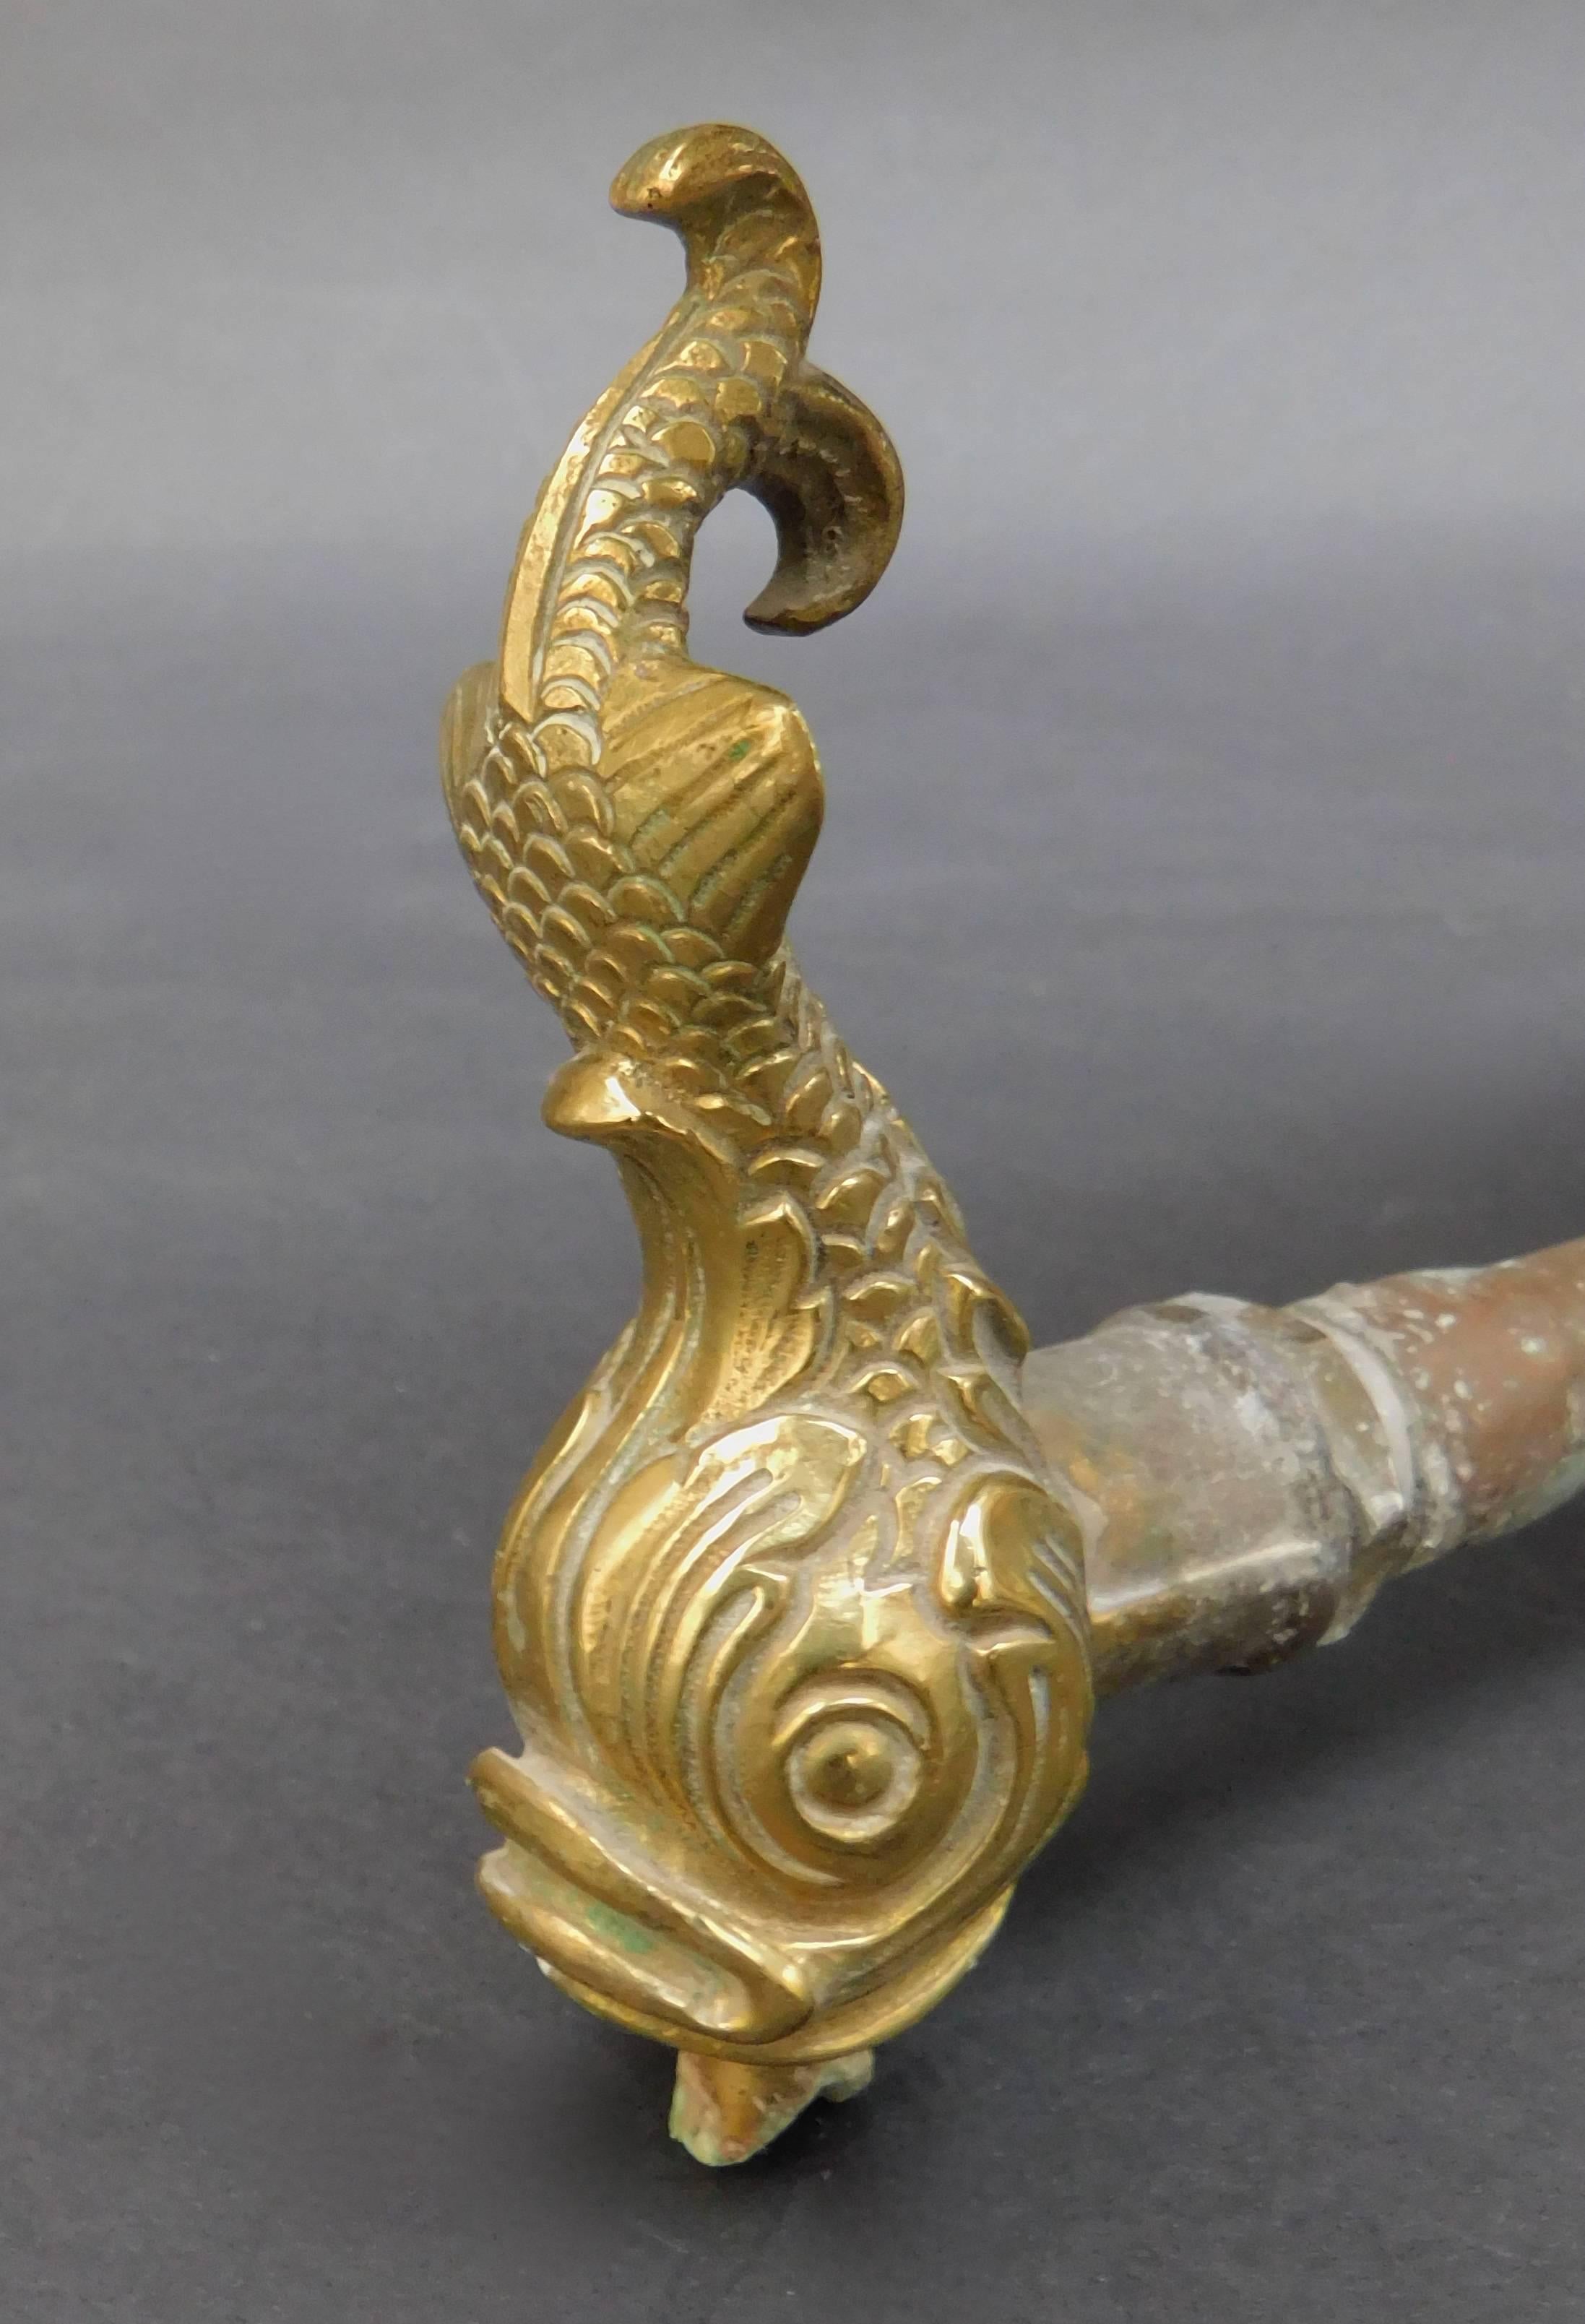 This antique French cast brass fountain spout has a stylized dolphin motif to be used in a grotto setting.
Measurement of the depth is to where the copper pipe connects to the brass, and not the full depth with copper pipe.